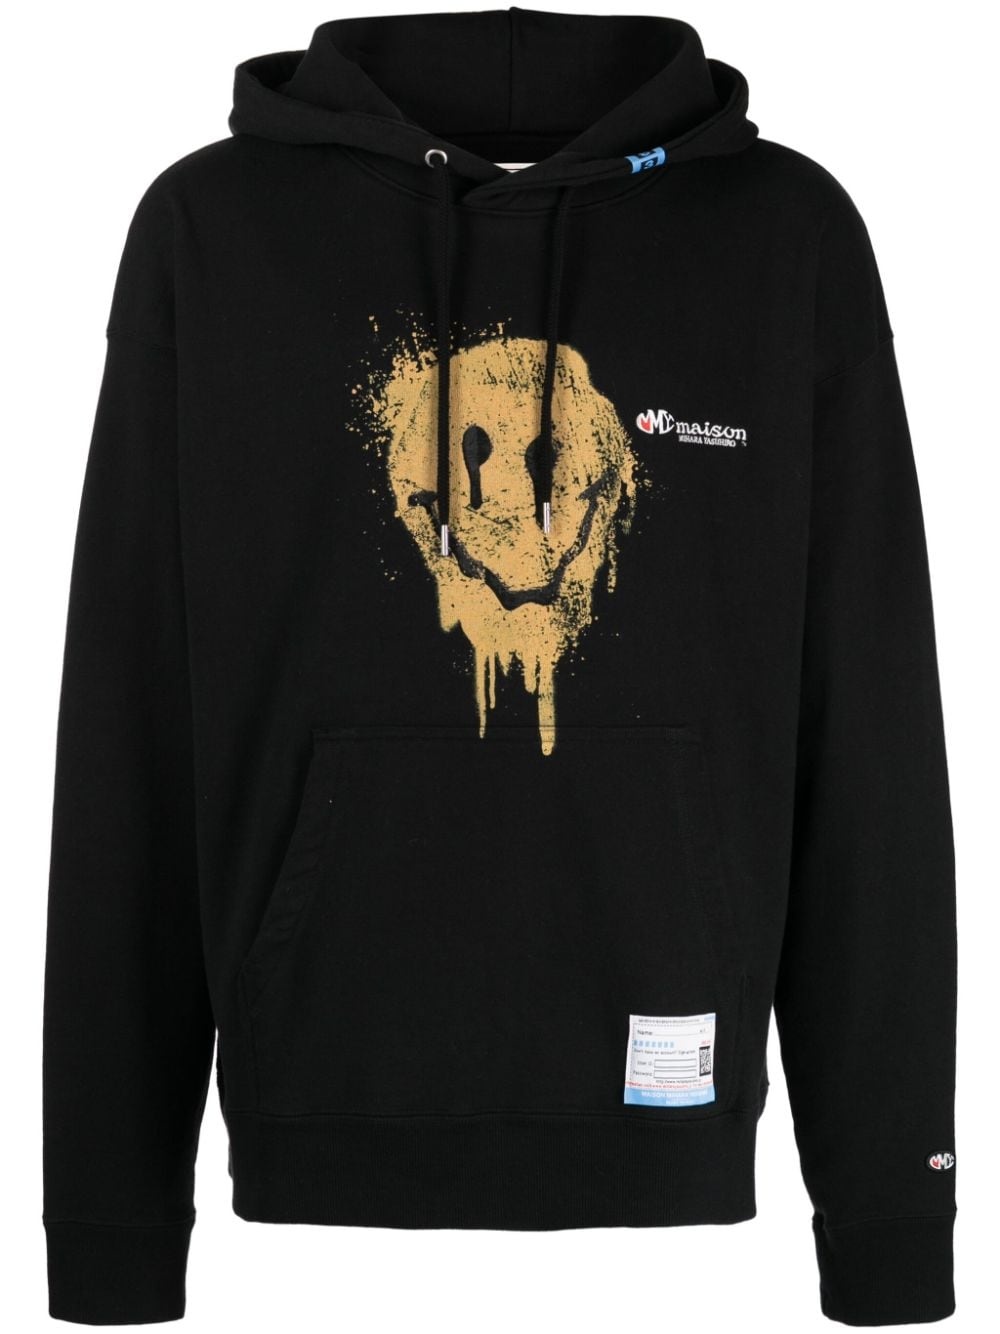 smiley-face print cotton hoodie - 1